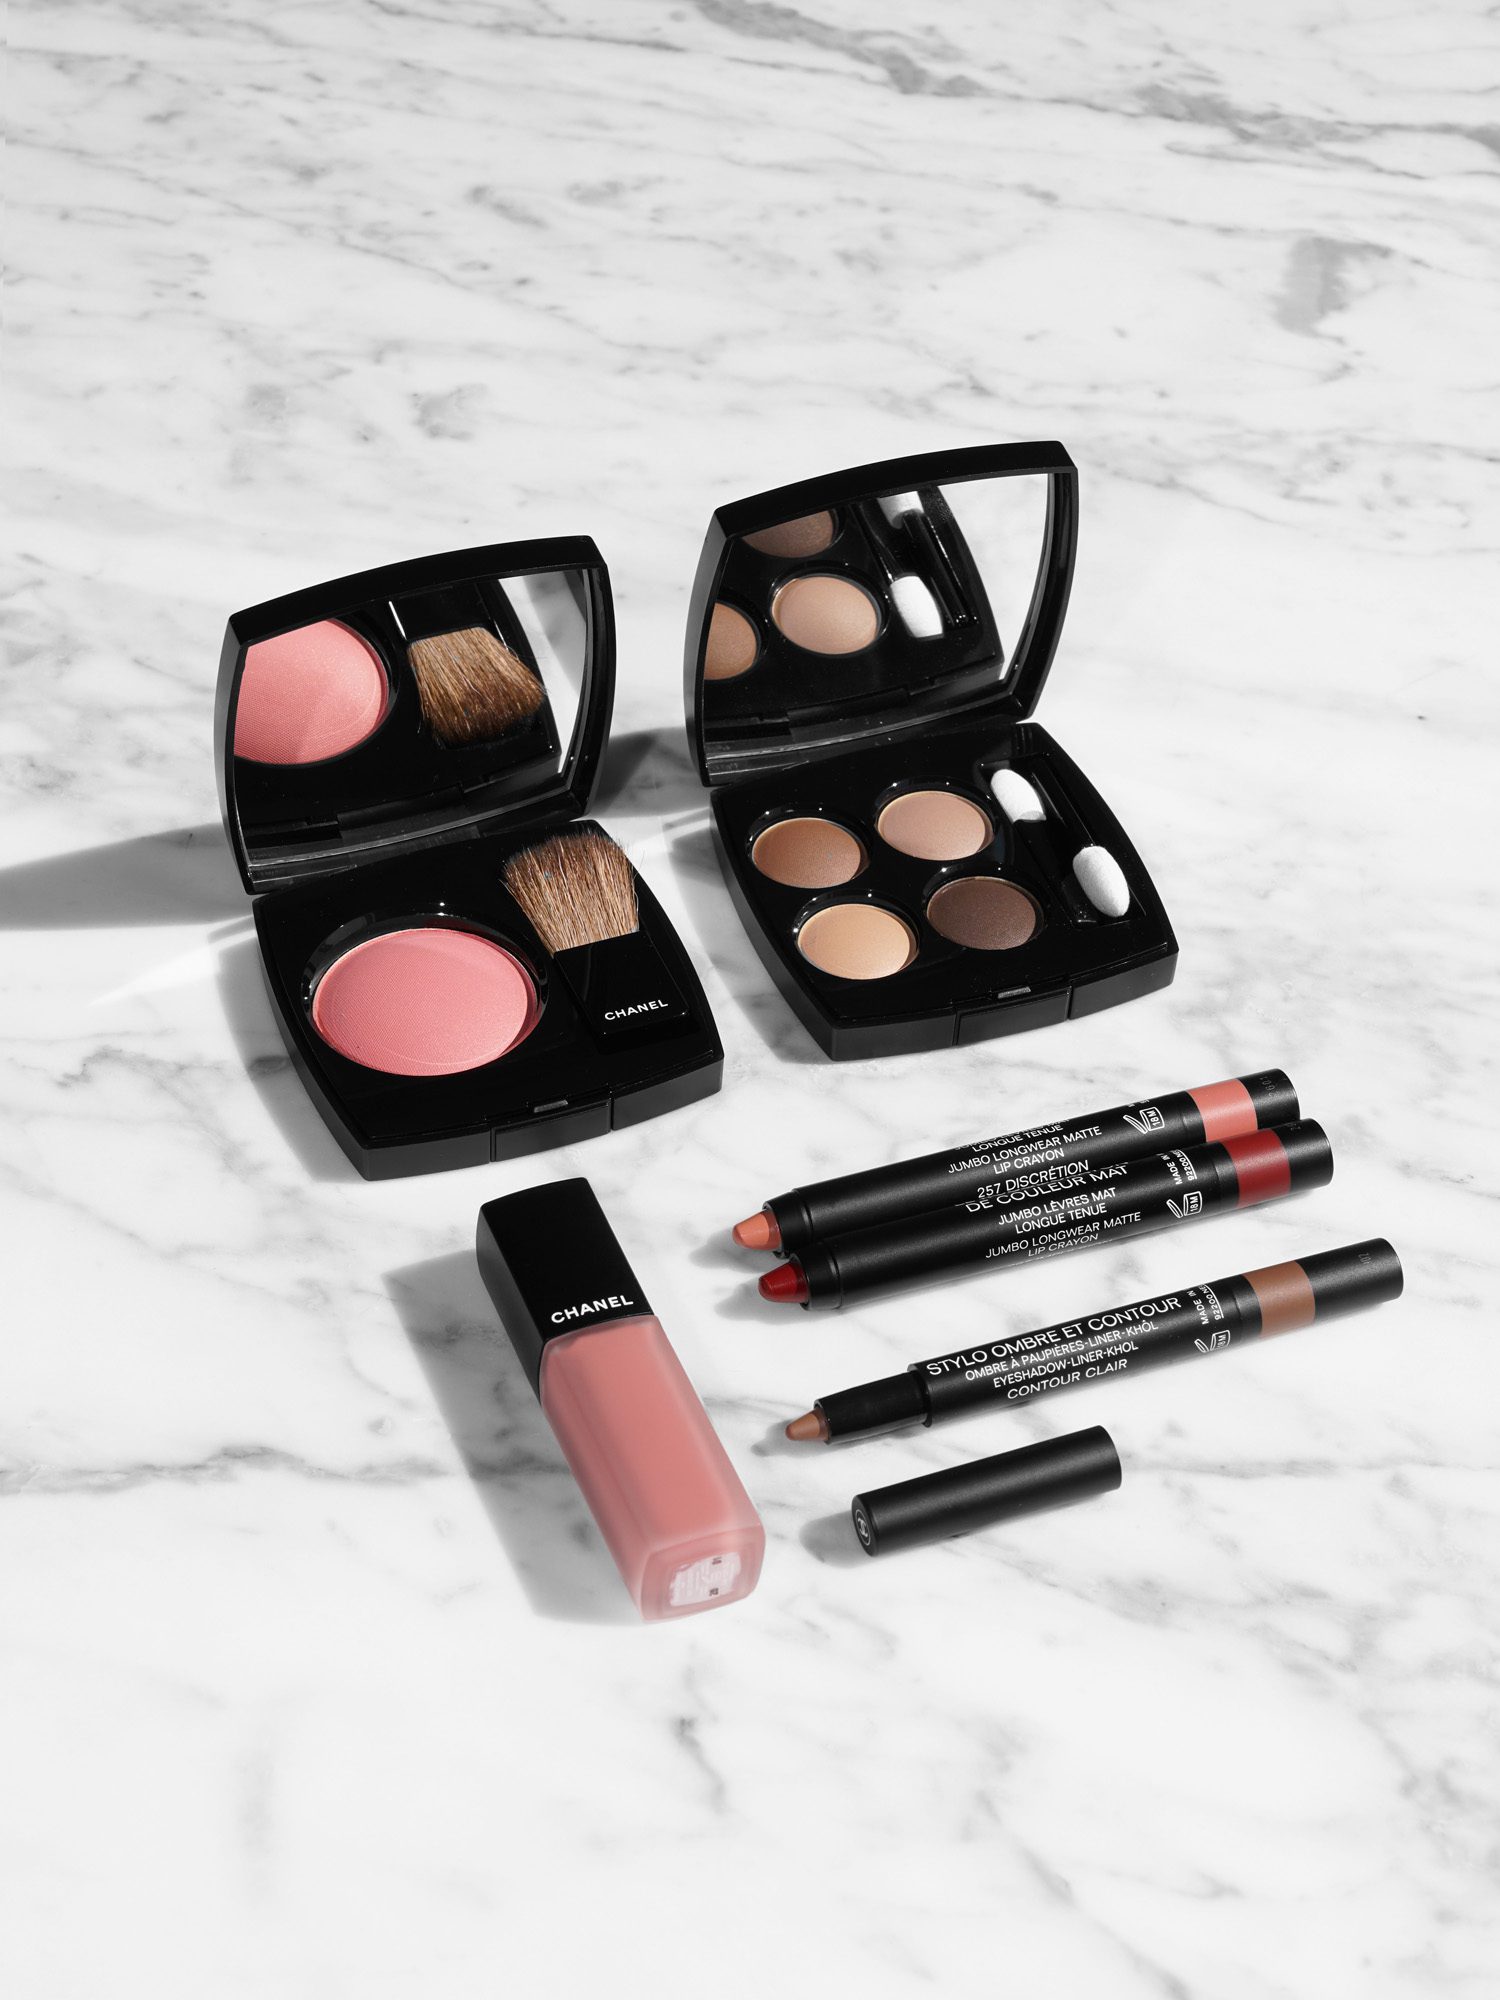 Blush Archives - The Beauty Look Book